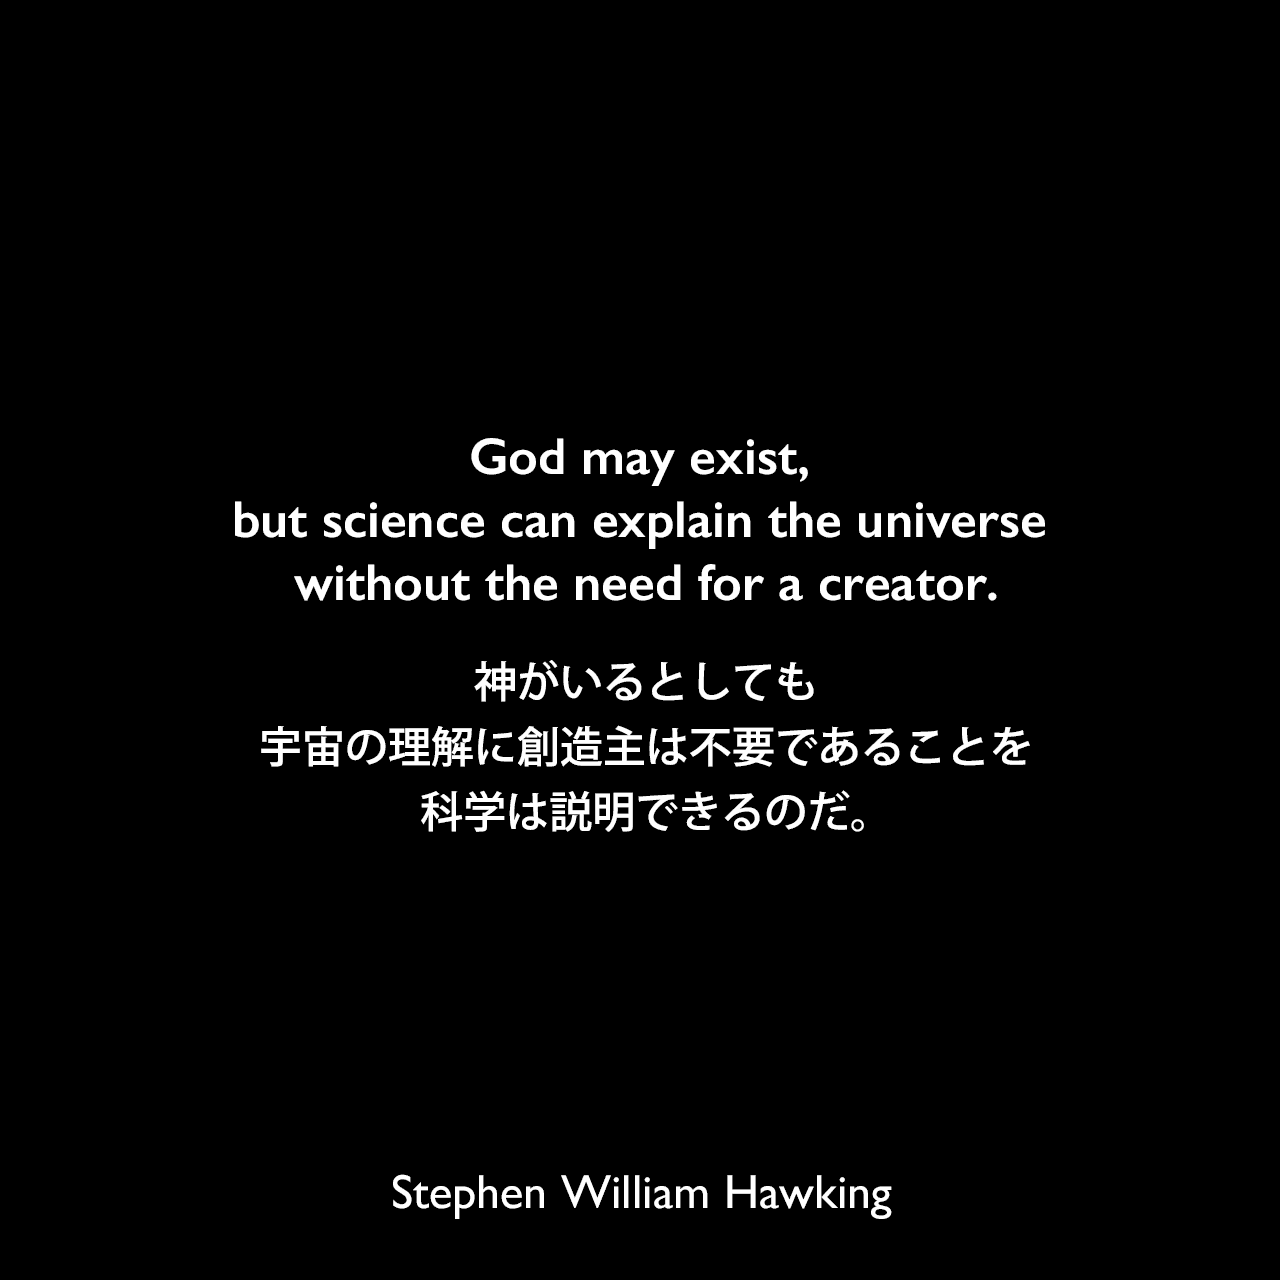 God may exist, but science can explain the universe without the need for a creator.神がいるとしても、宇宙の理解に創造主は不要であることを科学は説明できるのだ。Stephen William Hawking